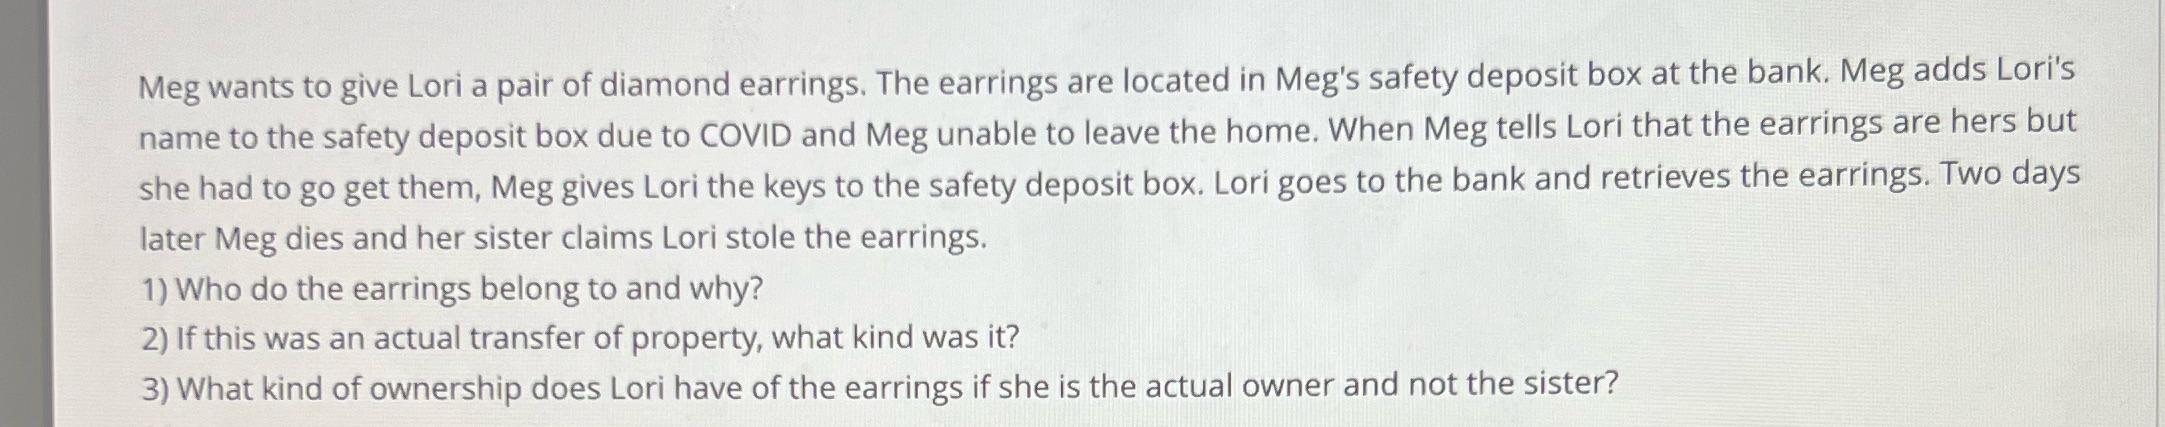 Meg wants to give Lori a pair of diamond earrings. The earrings are located in Meg's safety deposit box at